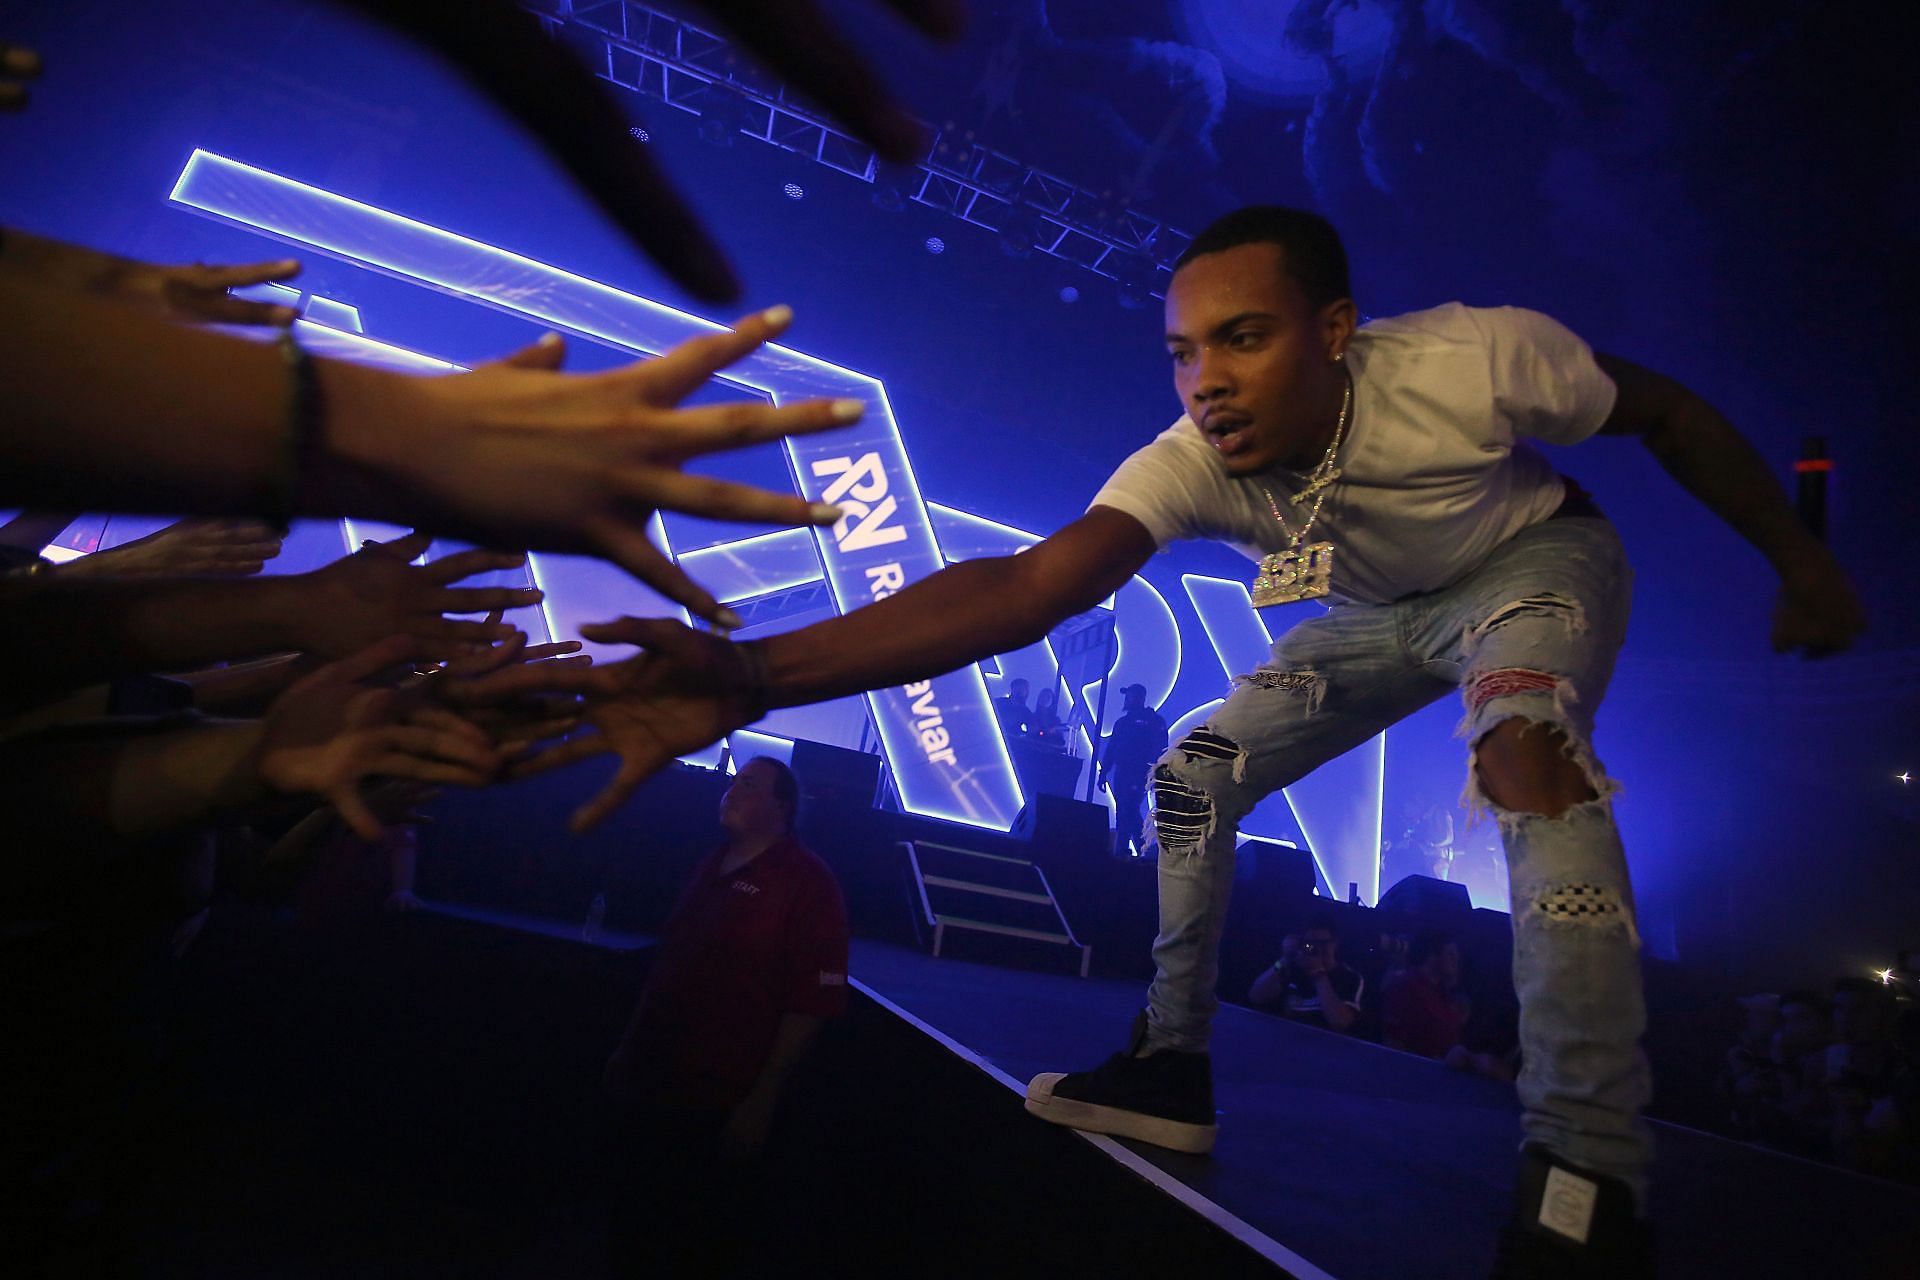 G Herbo requests fans not to approach him for photos during family time (Image via Getty)